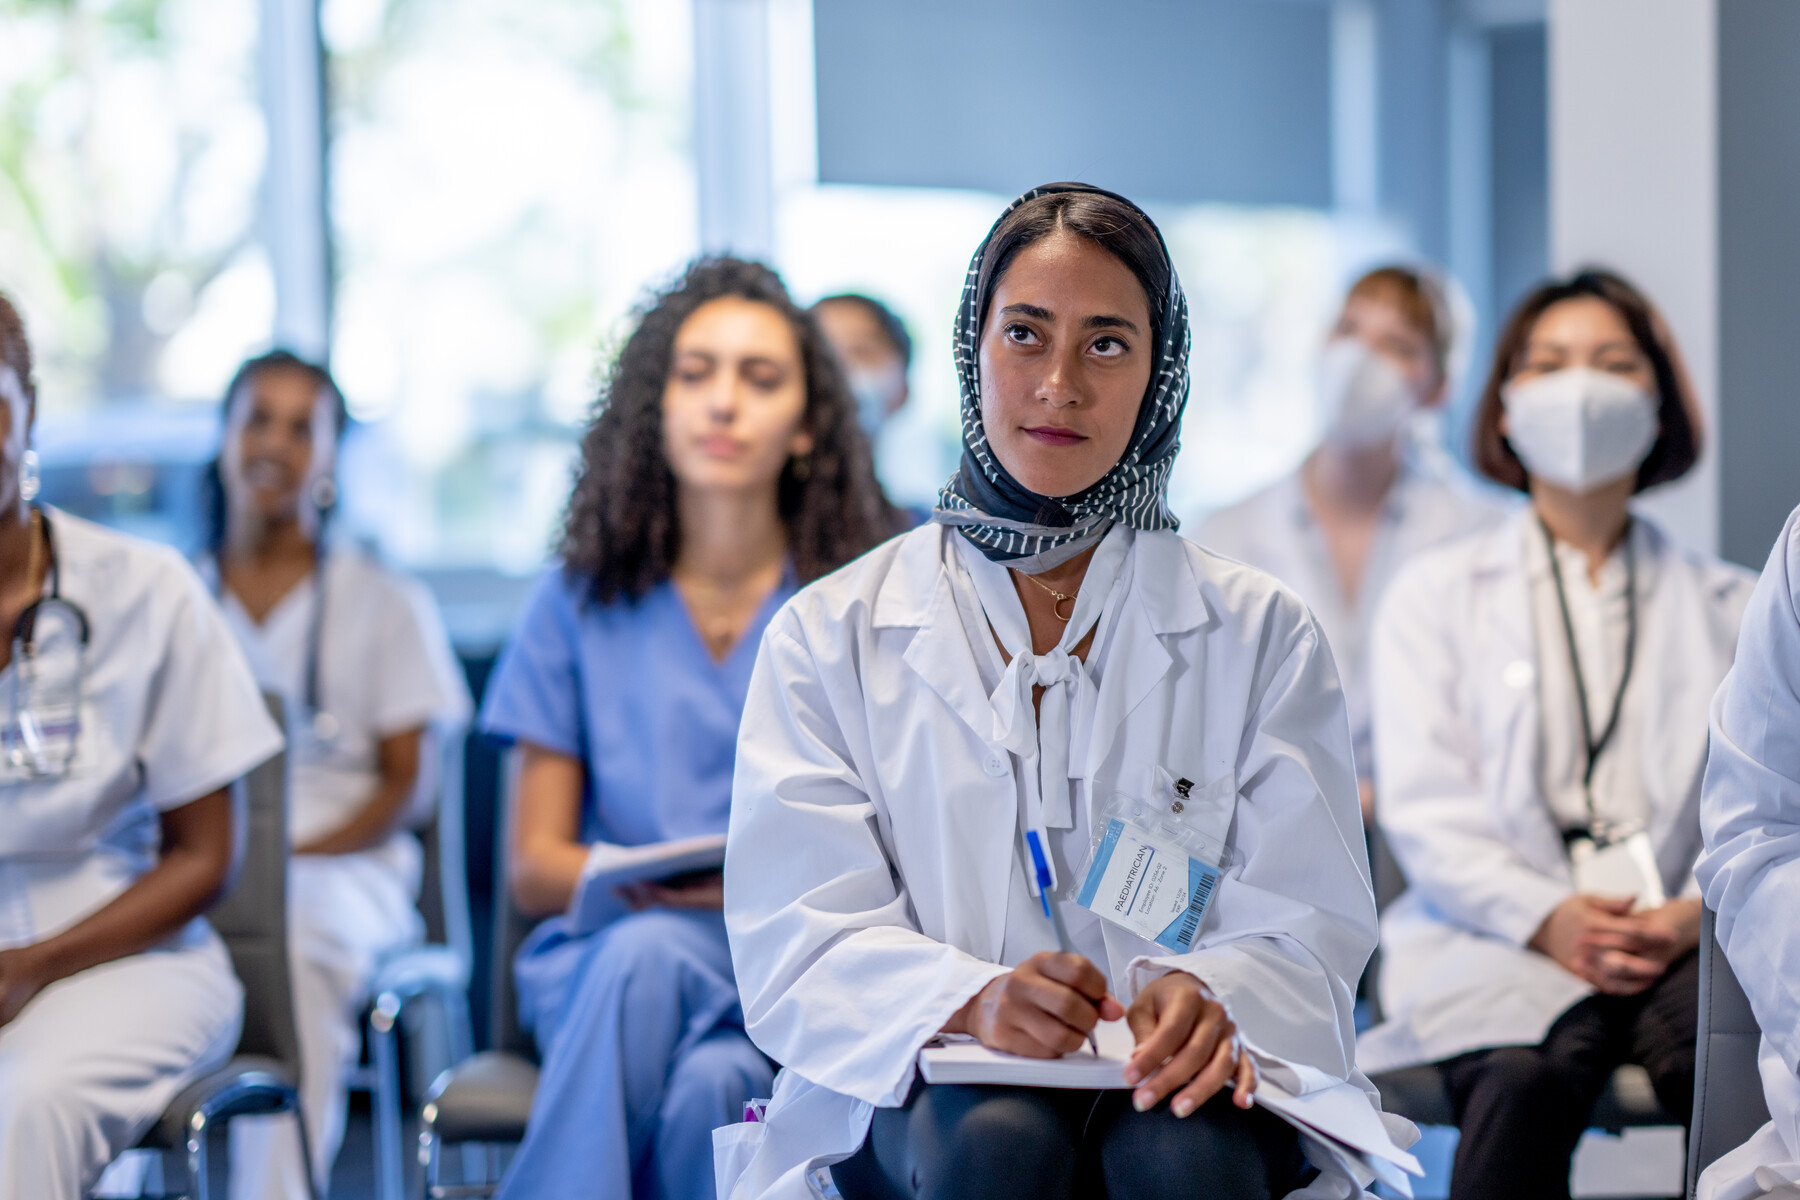 A diverse group of female medical students listen attentively while seated for a lecture.